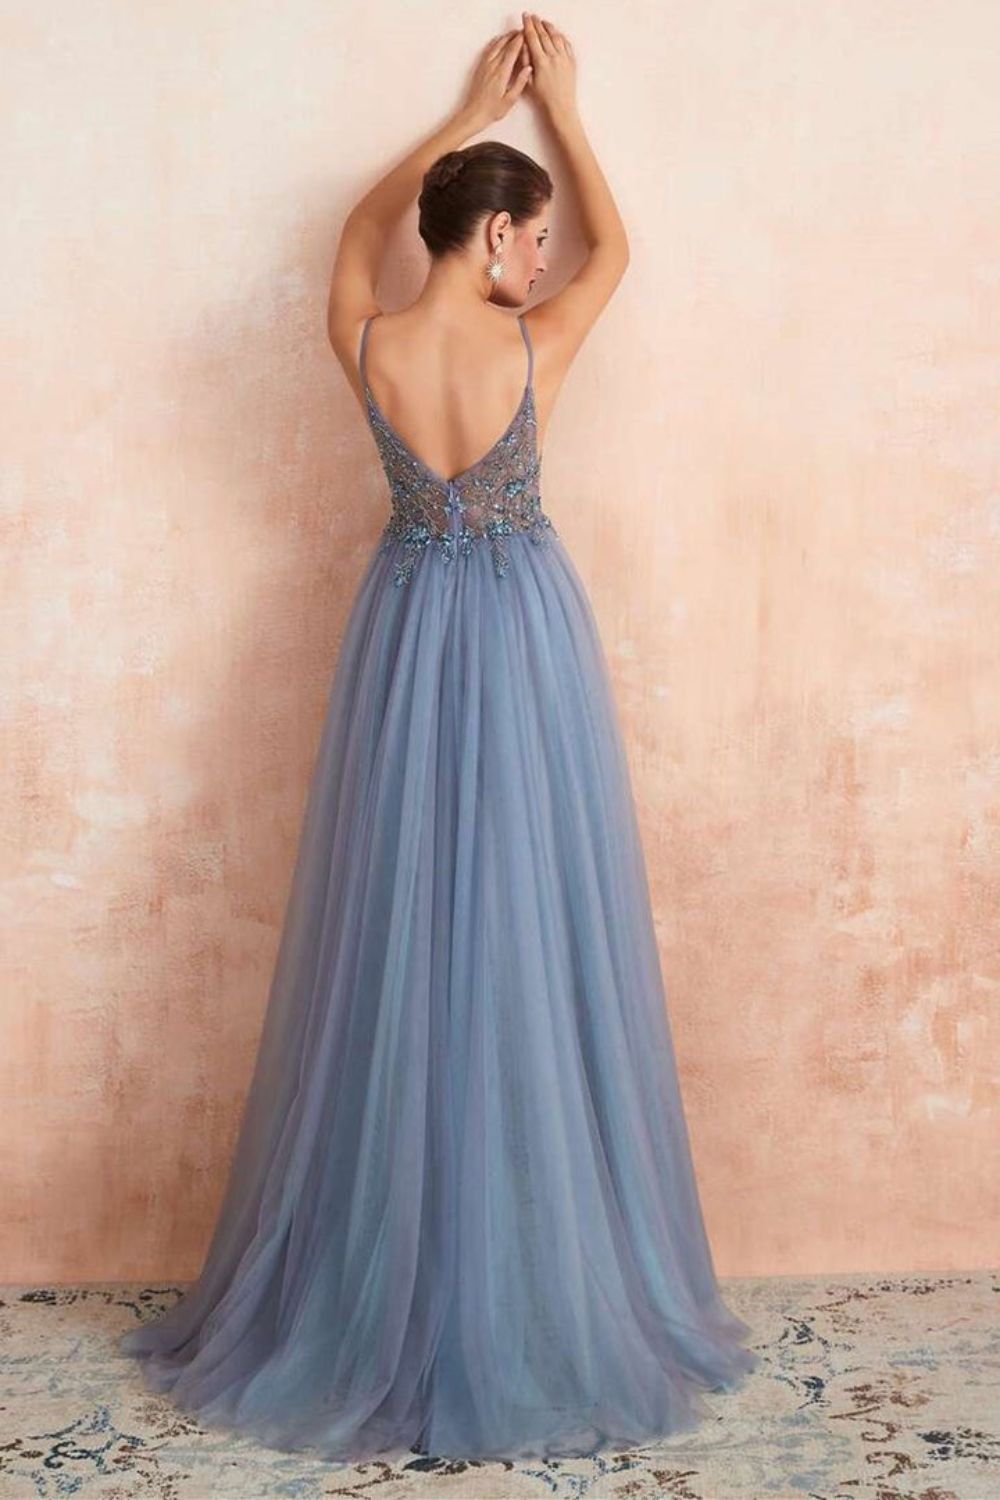 Dressime A Line Spaghetti Straps V Neck Tulle Prom Dress With Beads